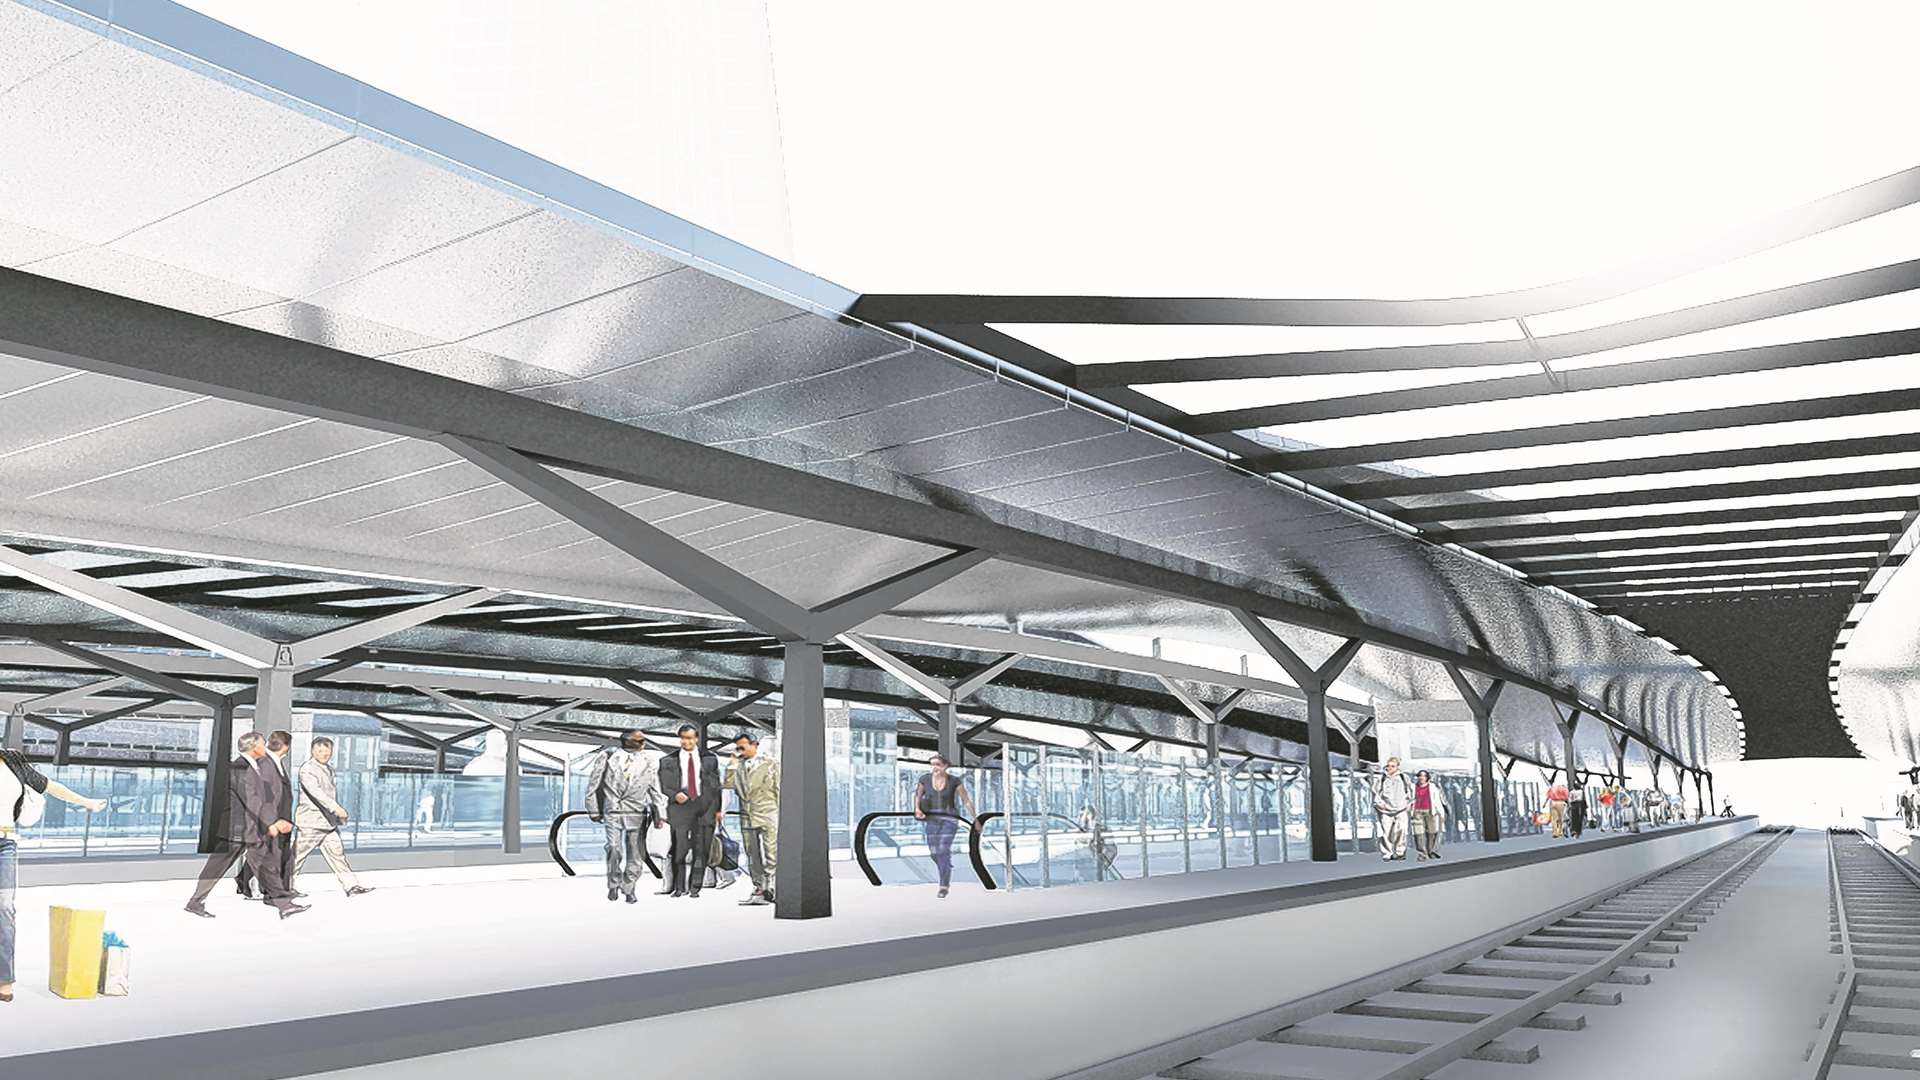 An artist's impression of the new-look London Bridge Station